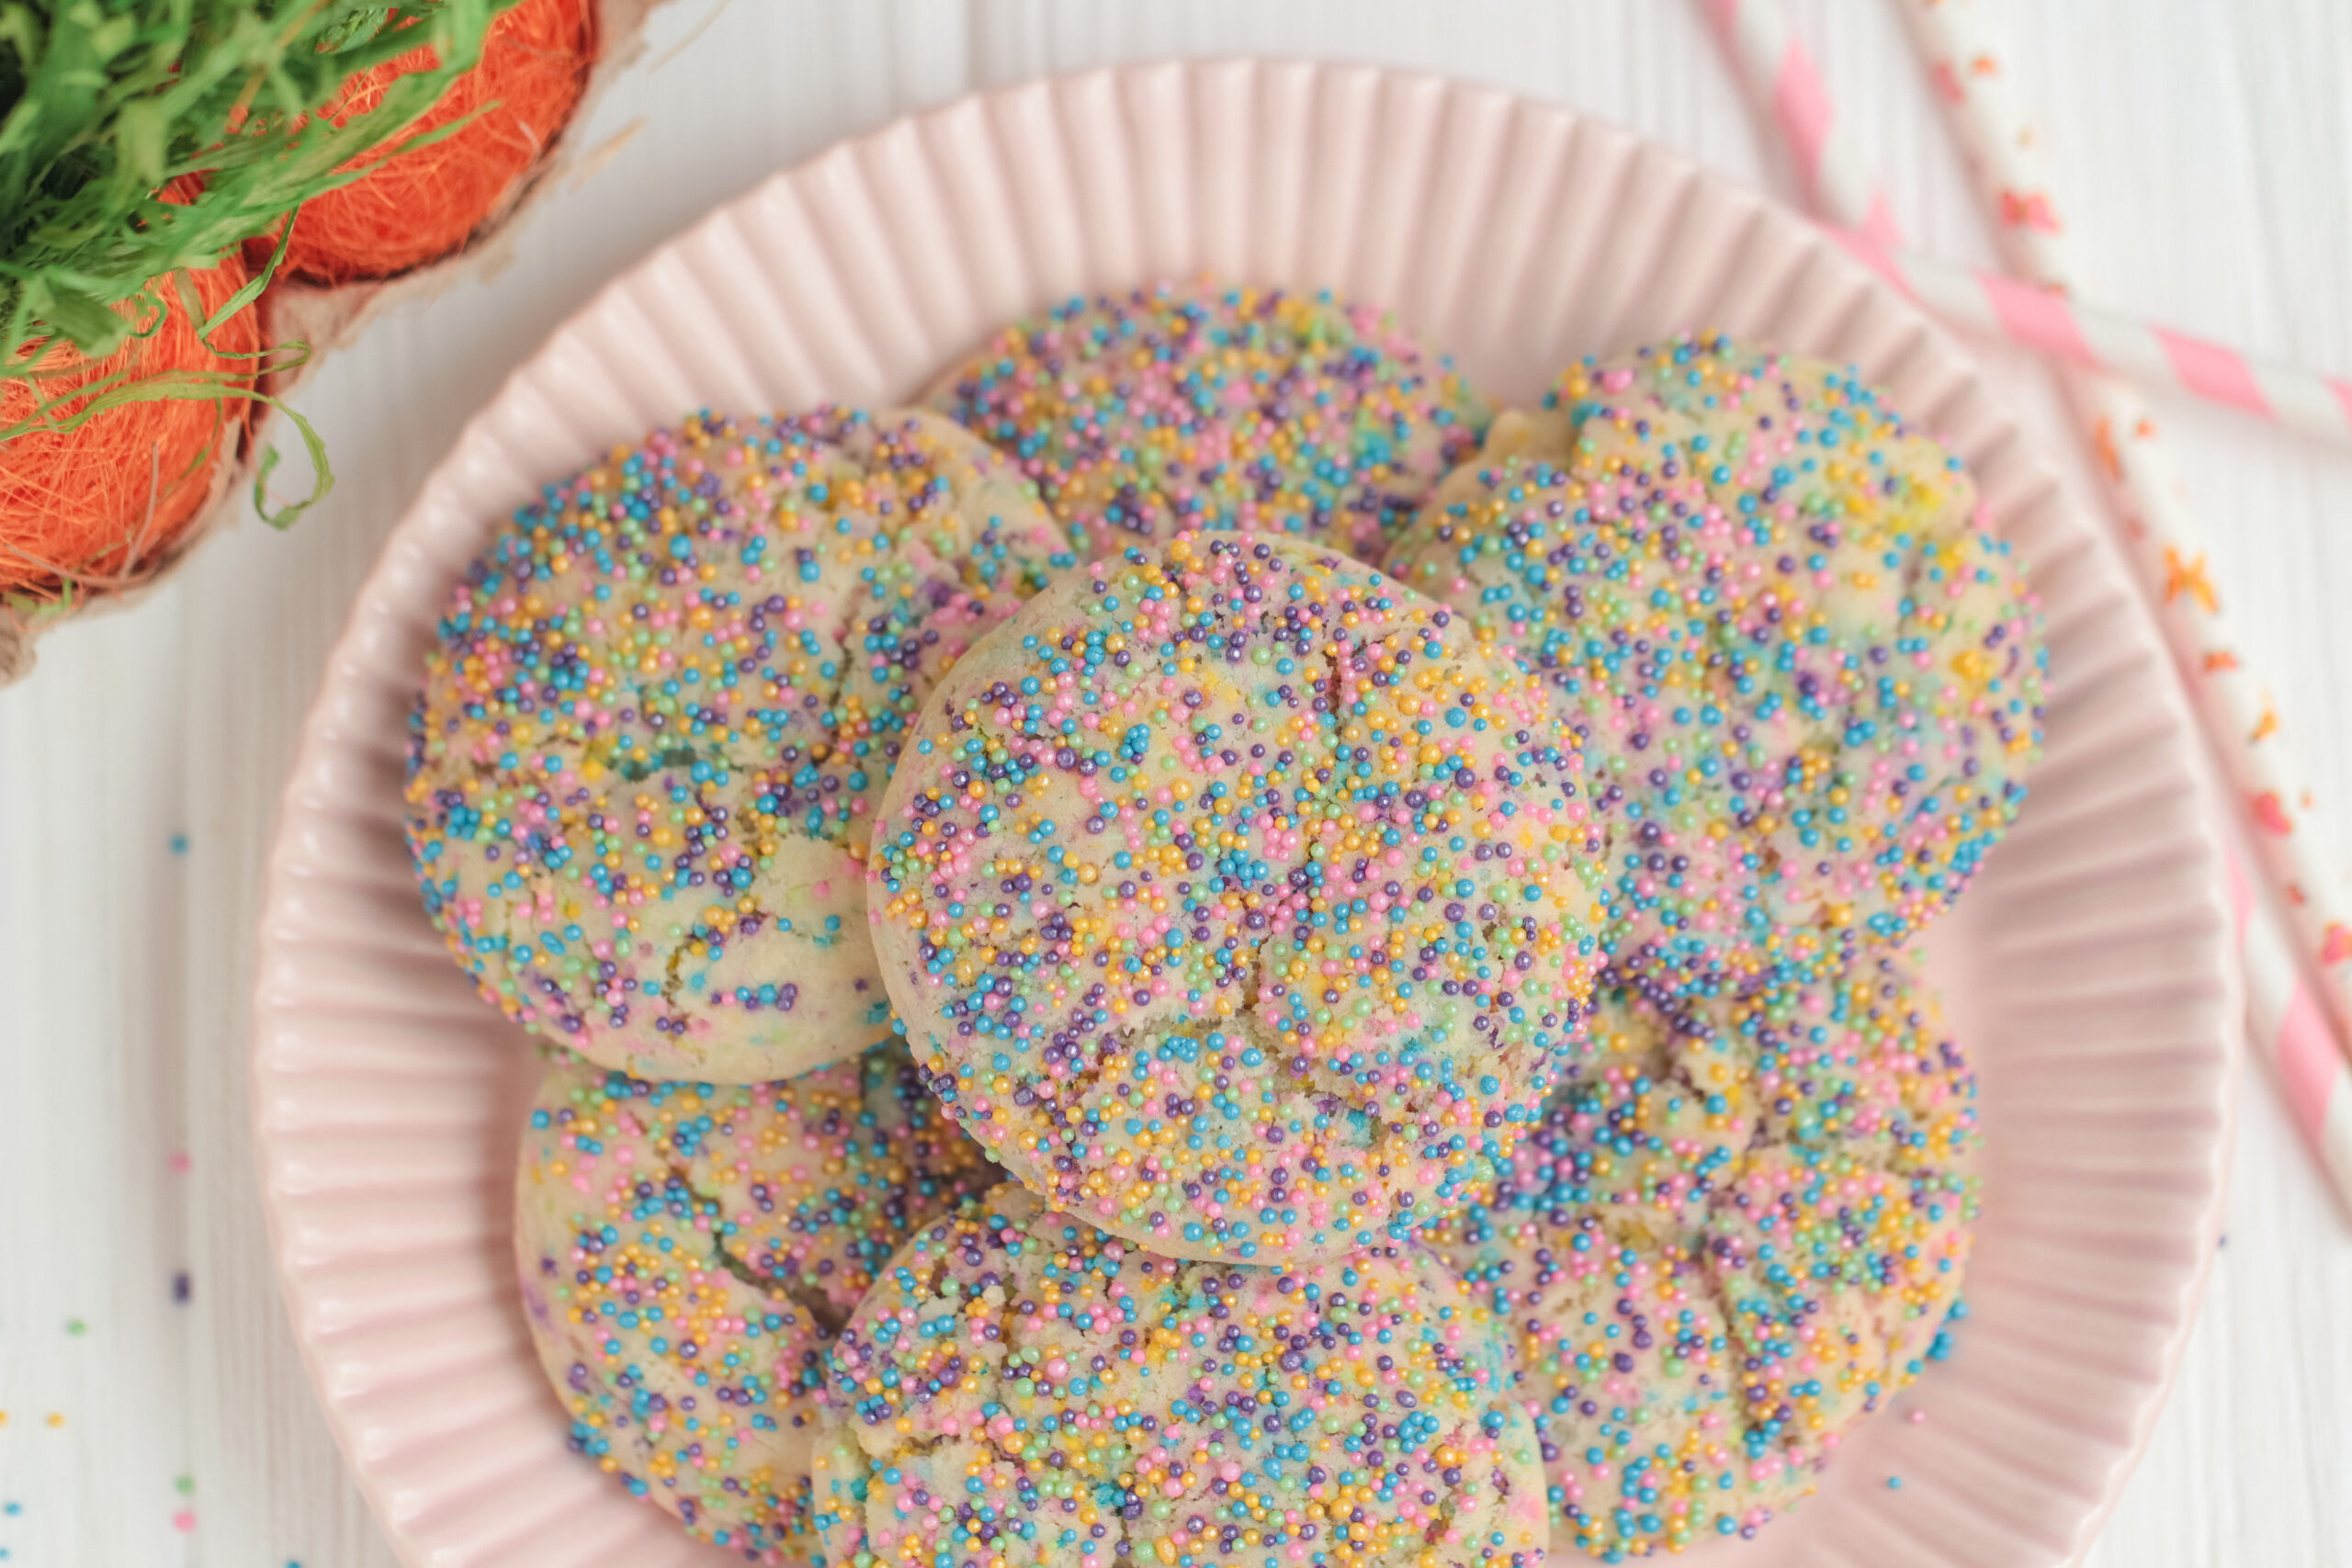 Love sugar cookies? This Easter sprinkle sugar cookies recipe is perfect for you! These cookies are easy to make and taste delicious.